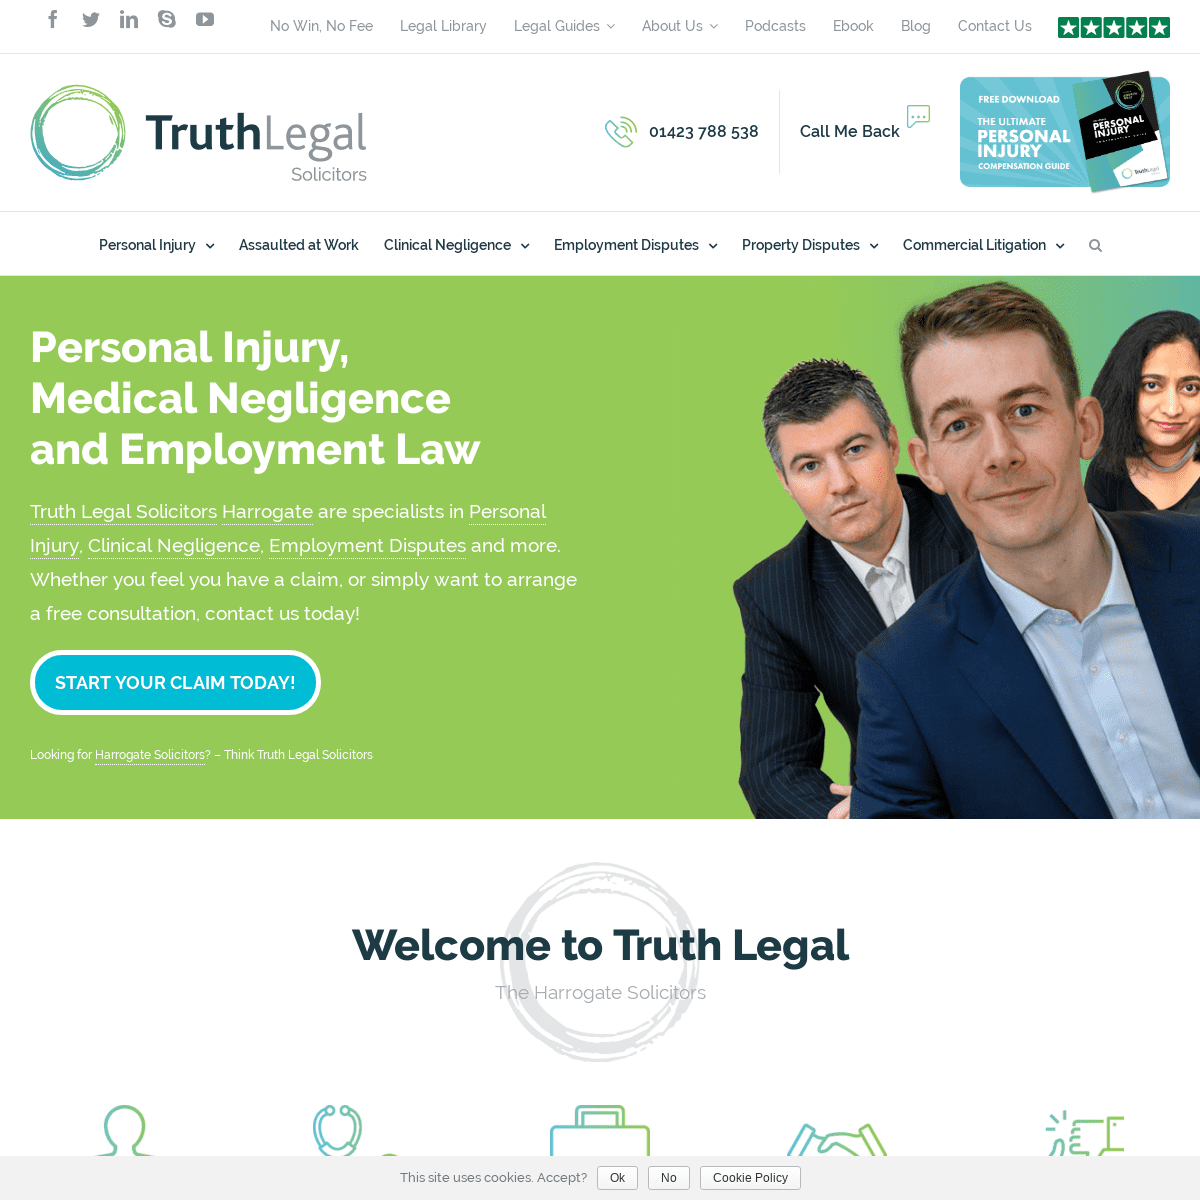 Truth Legal | Harrogate Solicitors | Honest and Ethical Legal Advice